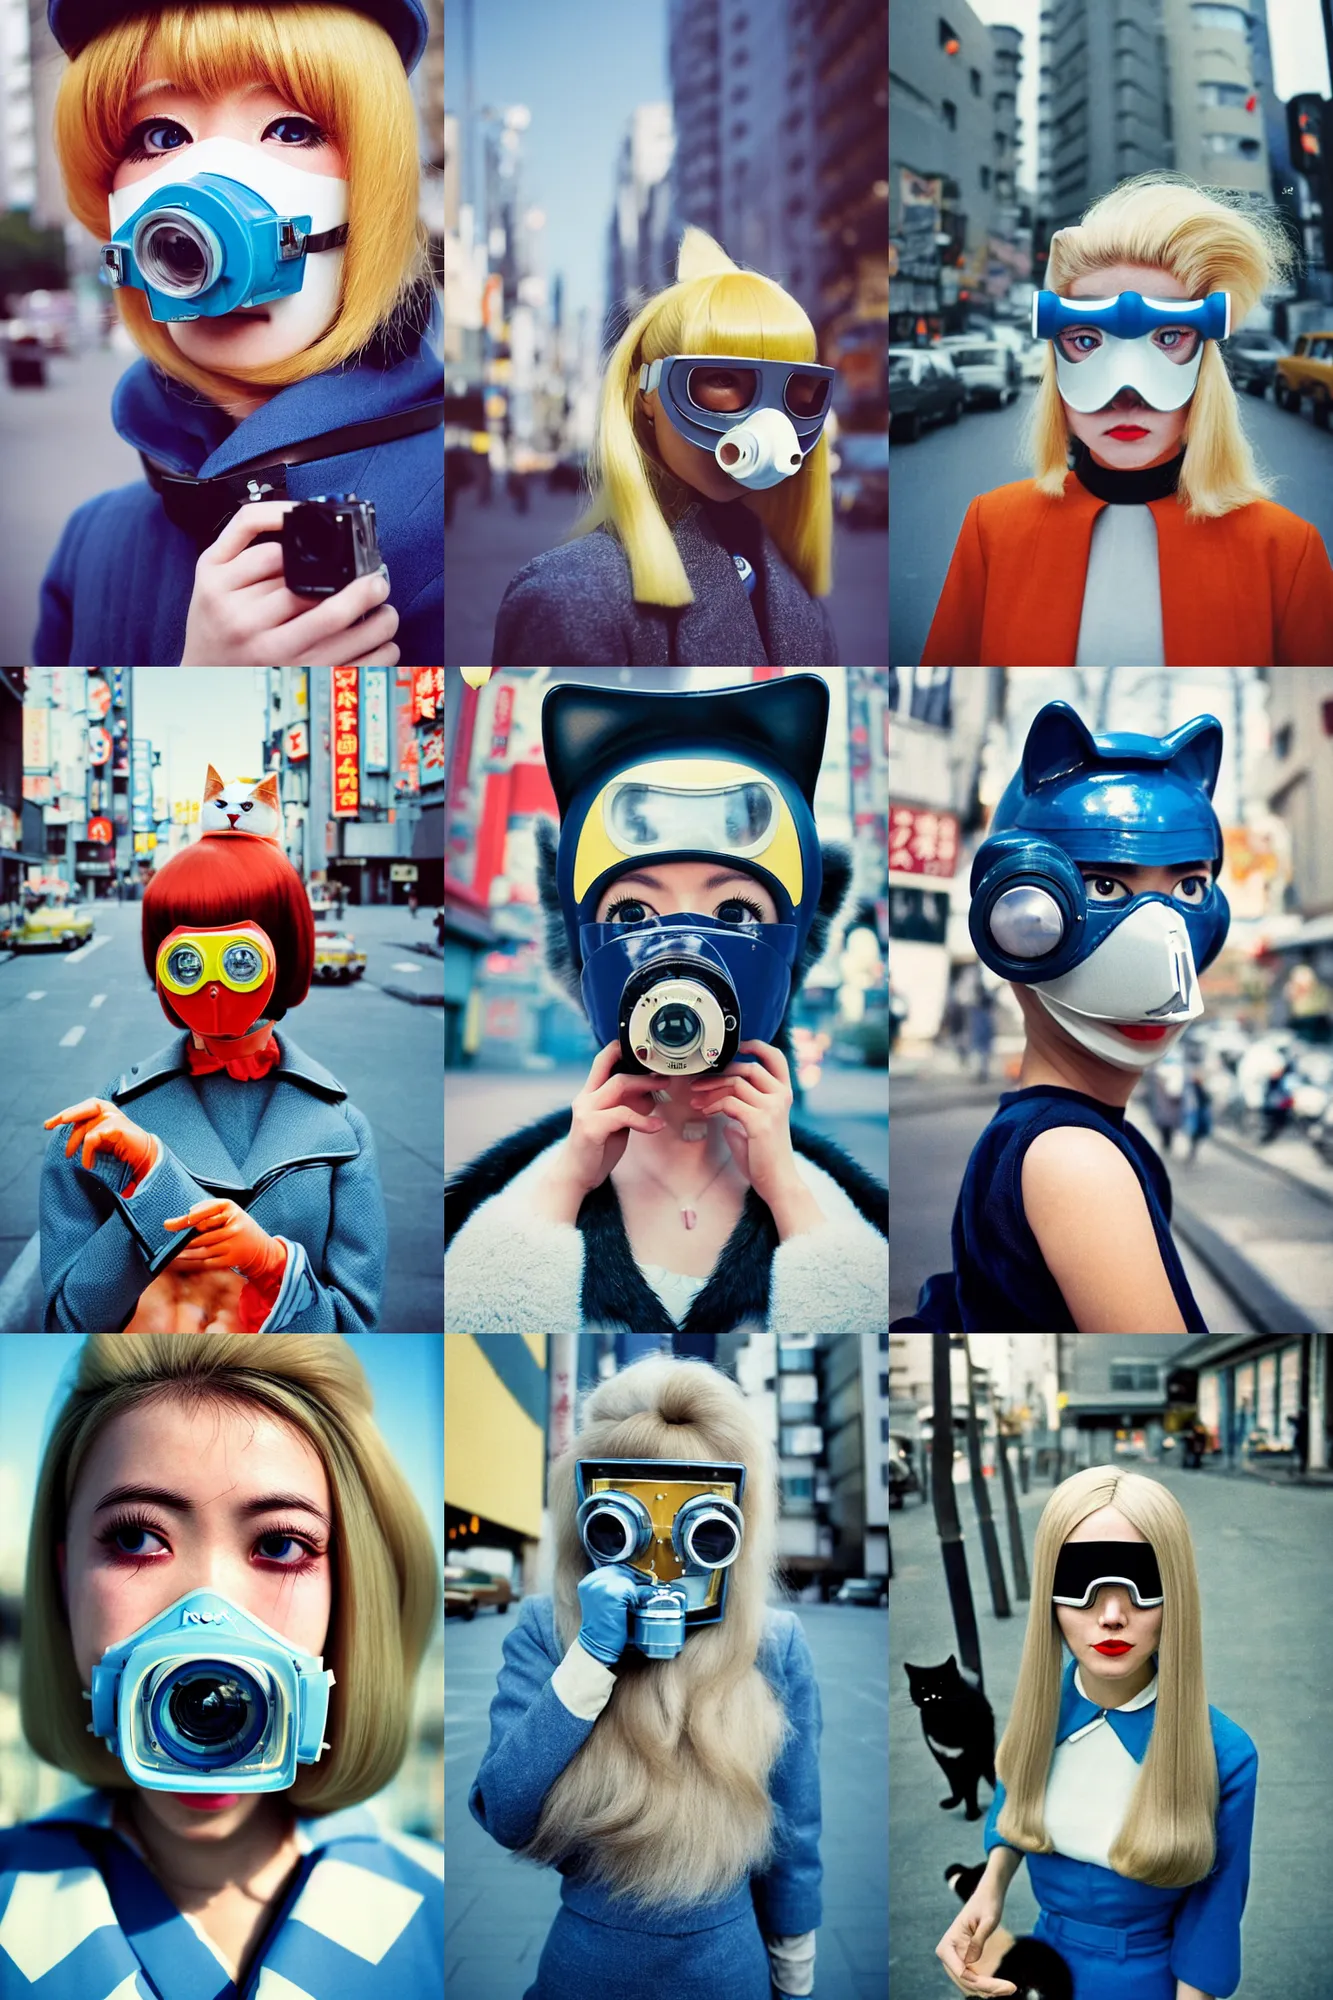 Prompt: Kodak portra 400,8K,highly detailed: beautiful three point perspective extreme closeup portrait photo in style of 1960s frontiers in cosplay retrofuturism tokyo seinen manga street photography fashion edition, tilt shift zaha hadid style tokyo background, highly detailed, focus on cat mask respirator;blonde hair;blue eyes, clear eyes, soft lighting